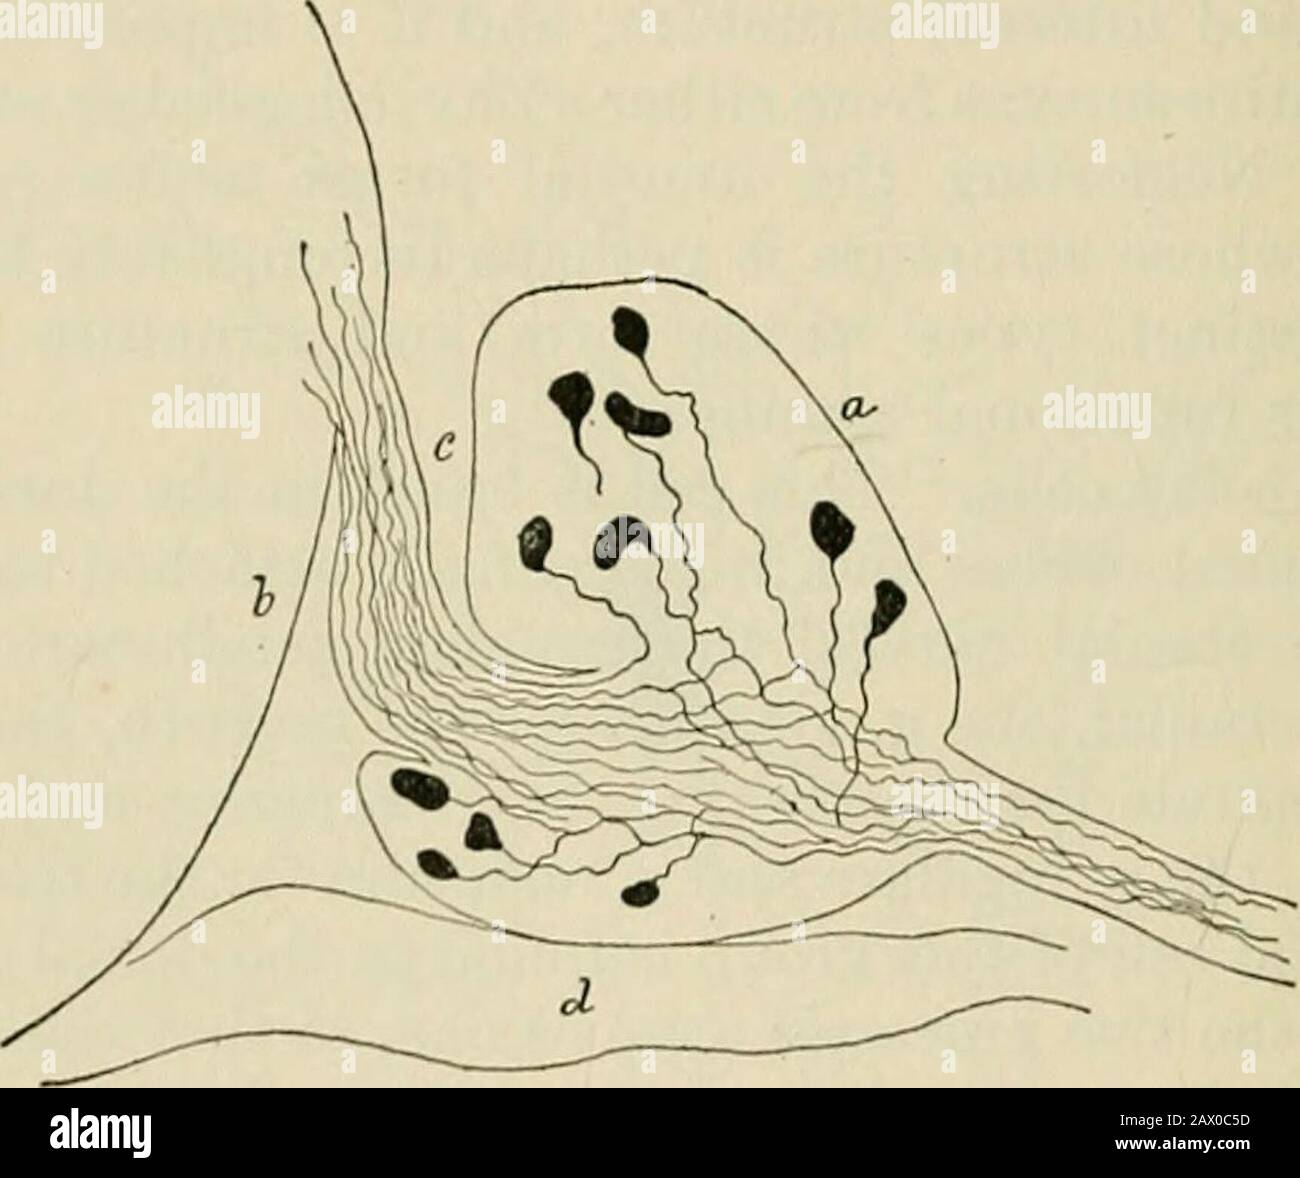 A text-book of physiology, for medical students and physicians . he Royal Society, 1908, B.vol. lxxx., 414. 134 PHYSIOLOGY OF CENTRAL NERVOUS SYSTEM. The nerve cells found in the sensory ganglia exhibit, as a matter of fact,a number of different types, some of which possess short dendritic processes.These histological variations cannot as yet be given a physiological signifi-cance, but their occurrence certainly seems to indicate a possibility thatthe sensory ganglia may have a much more varied physiological activitythan has been attributed to them heretofore. For a recent description ofthese Stock Photo